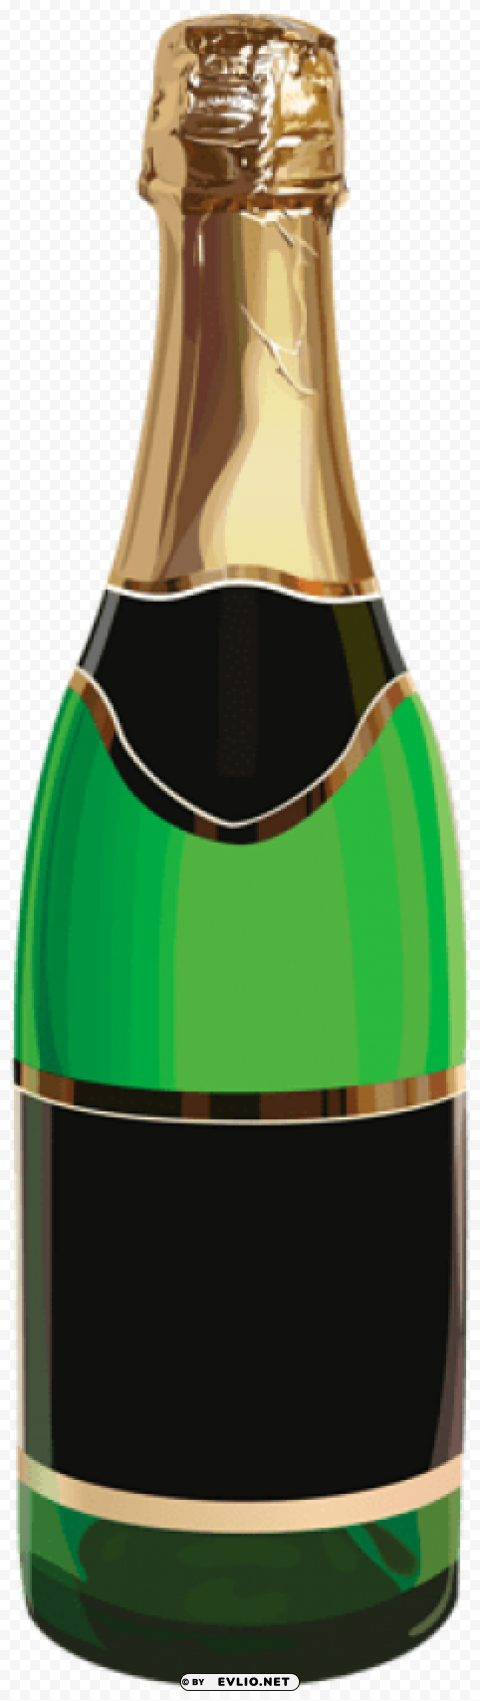 champagne bottle Clear Background Isolation in PNG Format